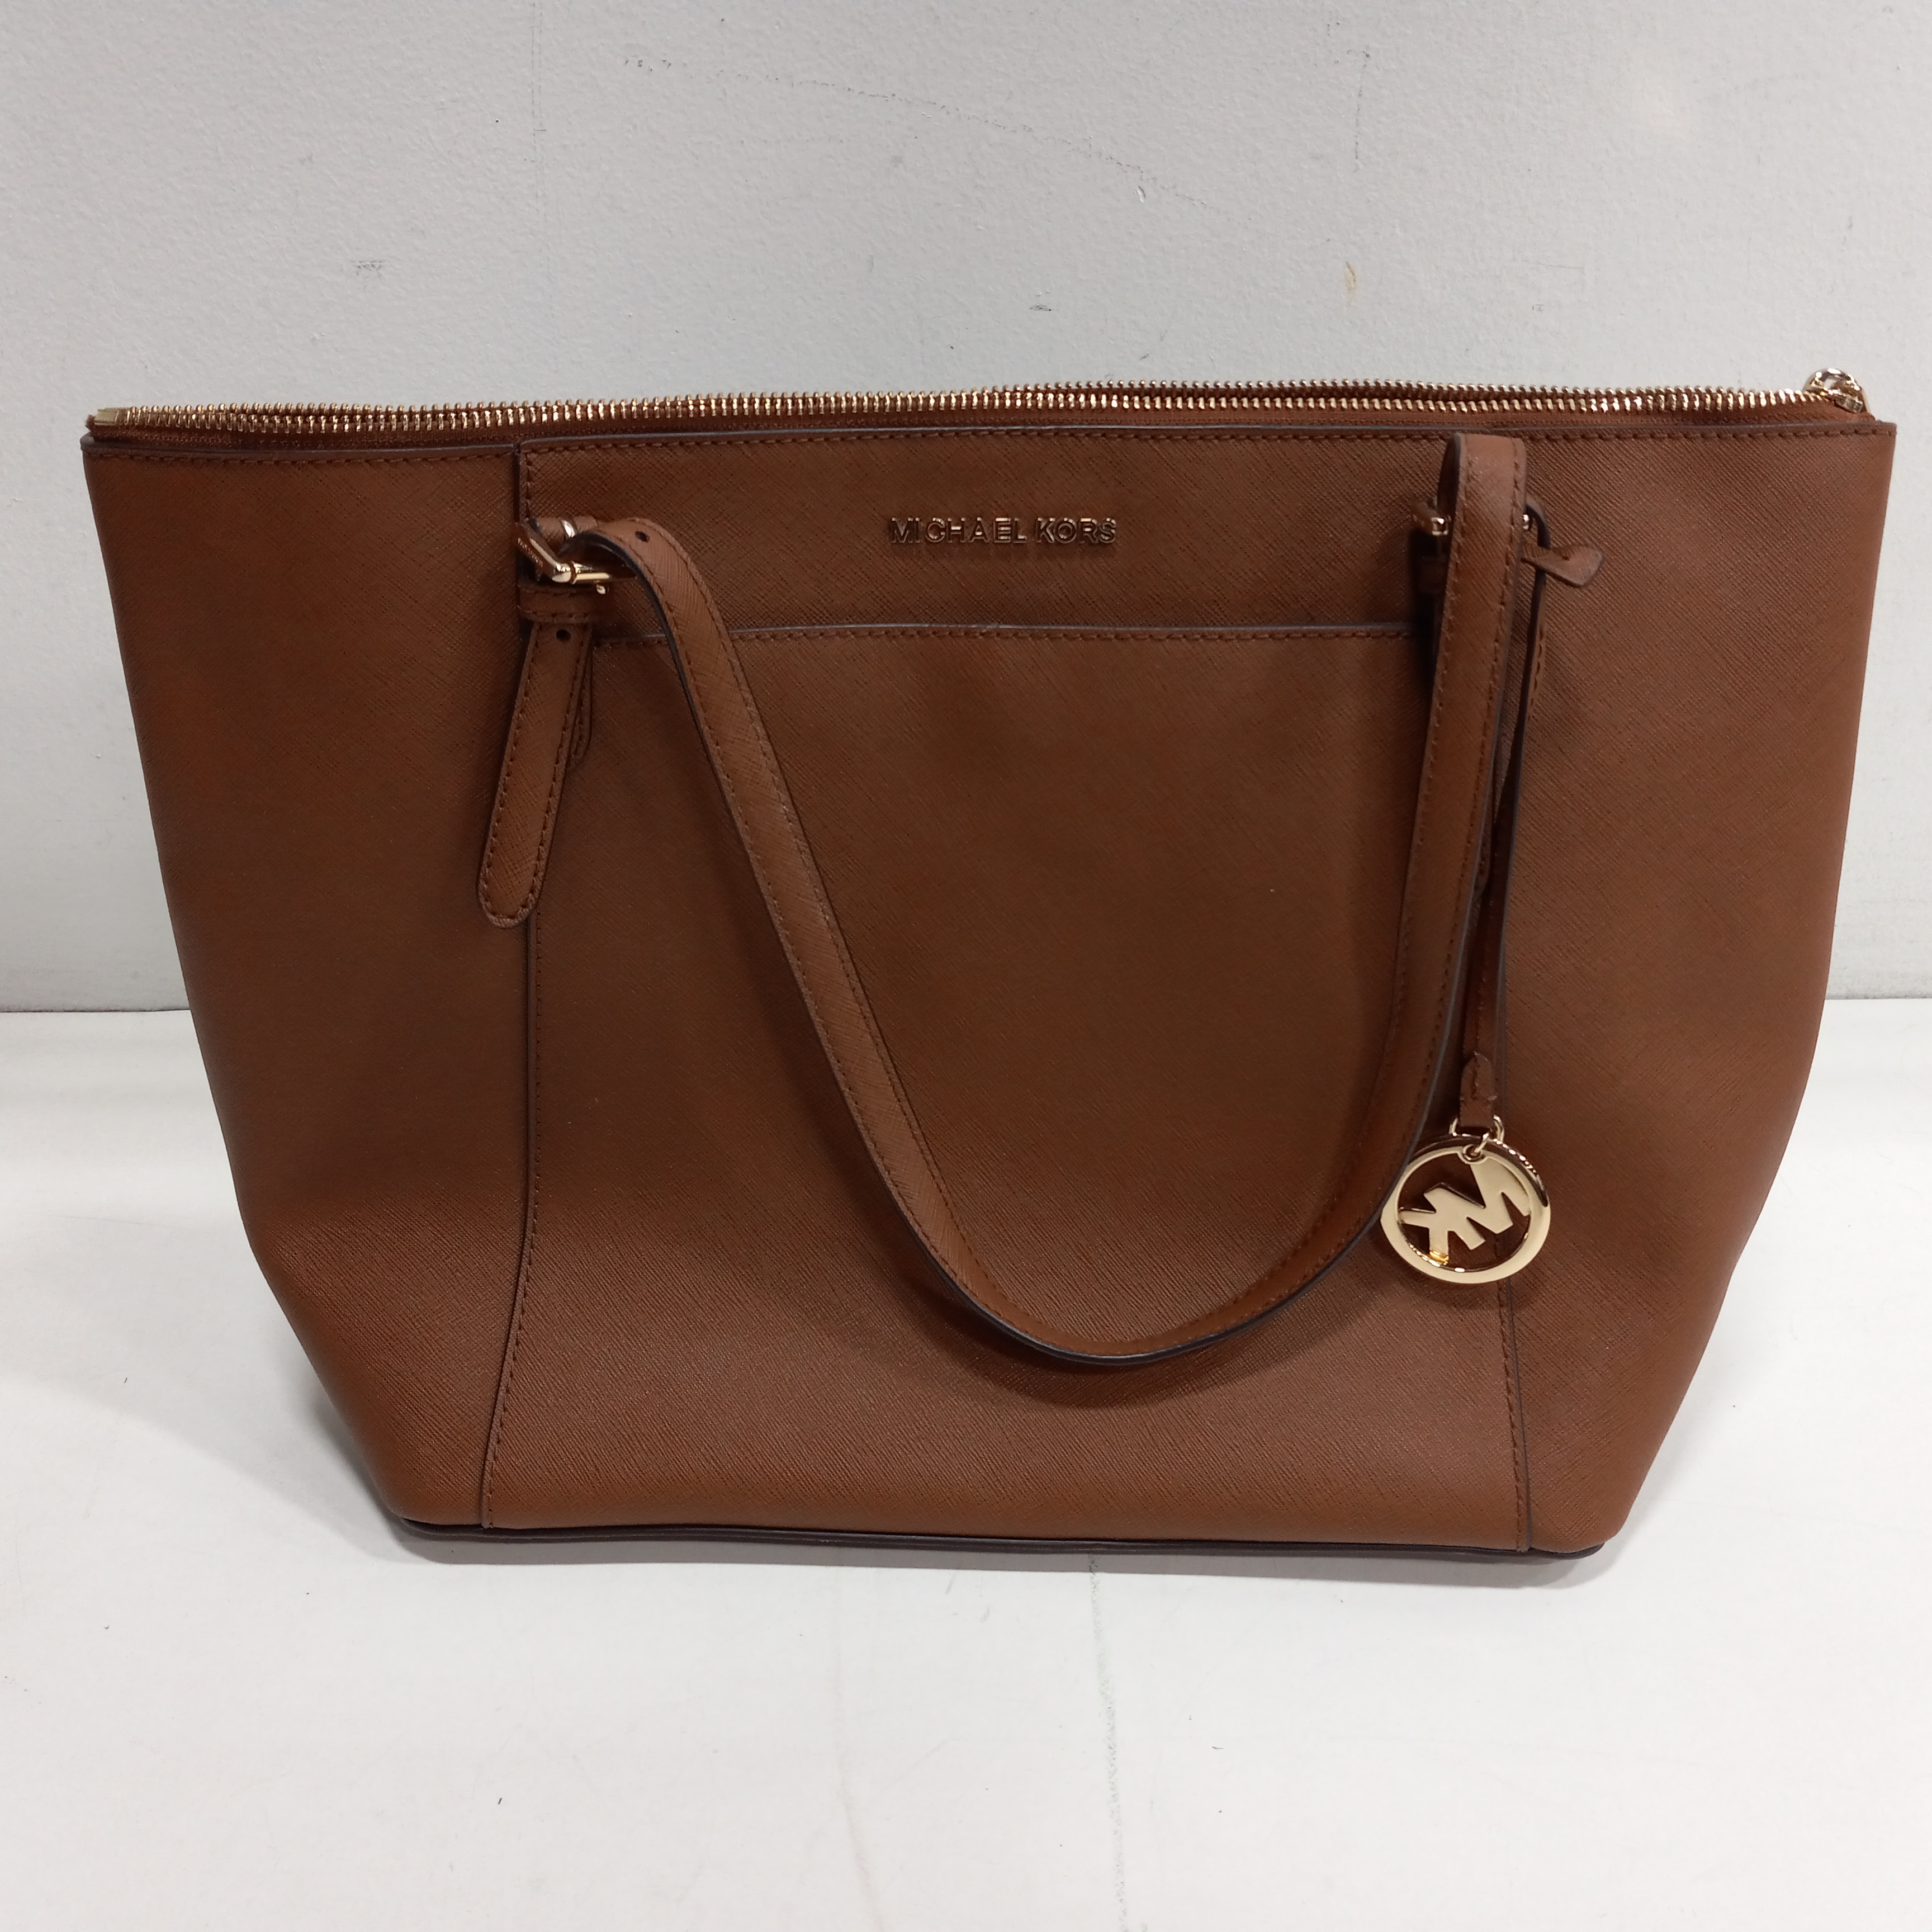 Michael Kors Voyager Large Saffiano Leather Top Zip Tote Bag Soft